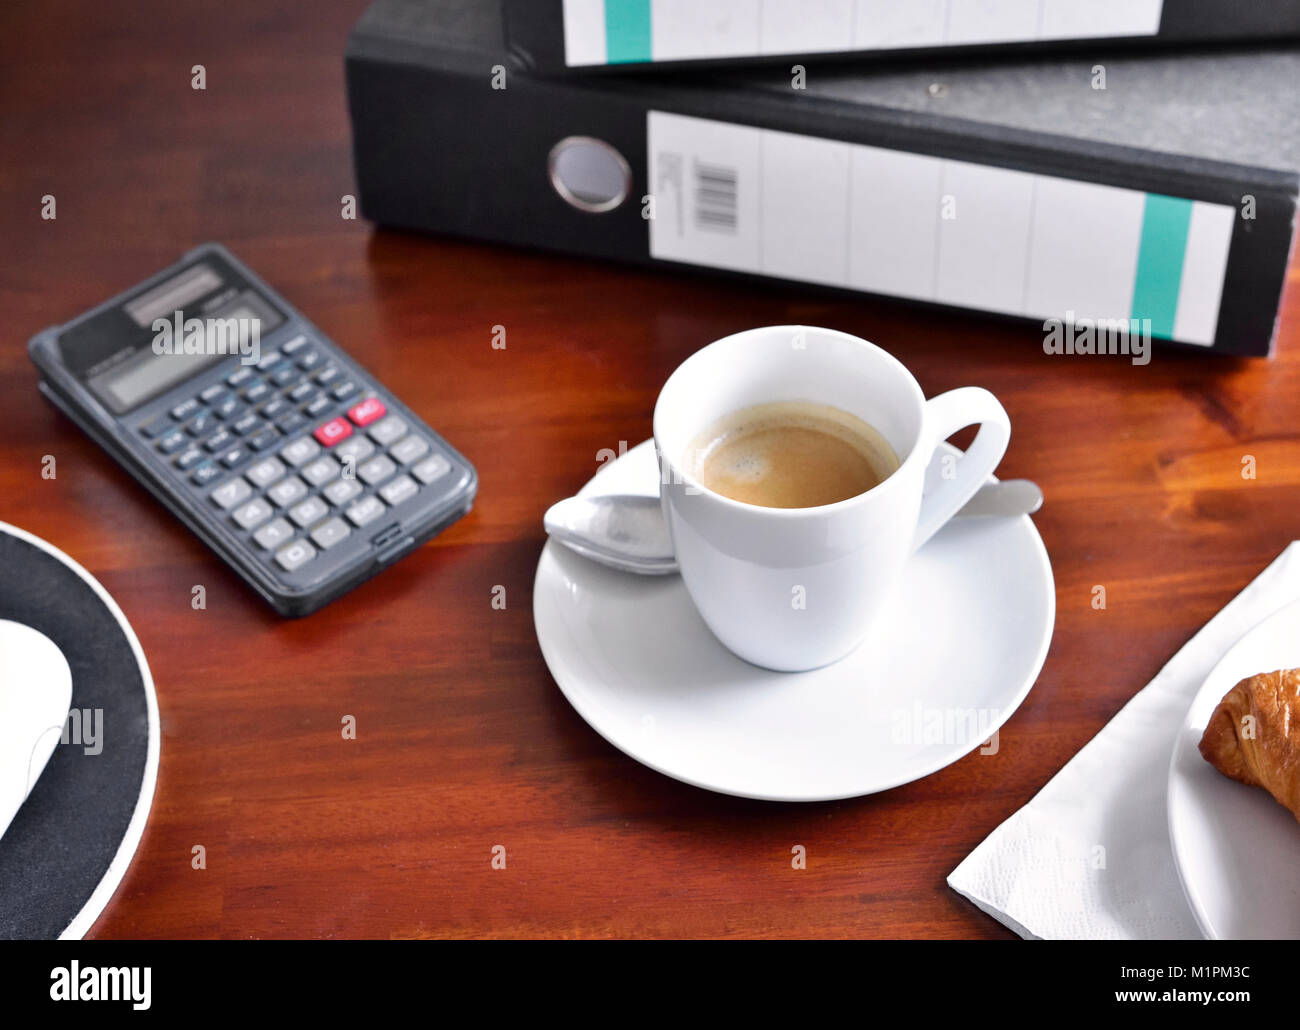 Workplace scene with breakfast. Breakfast background on a working place, croissant and coffee cup. Computer, snack and hot drink, office scene, break. Stock Photo